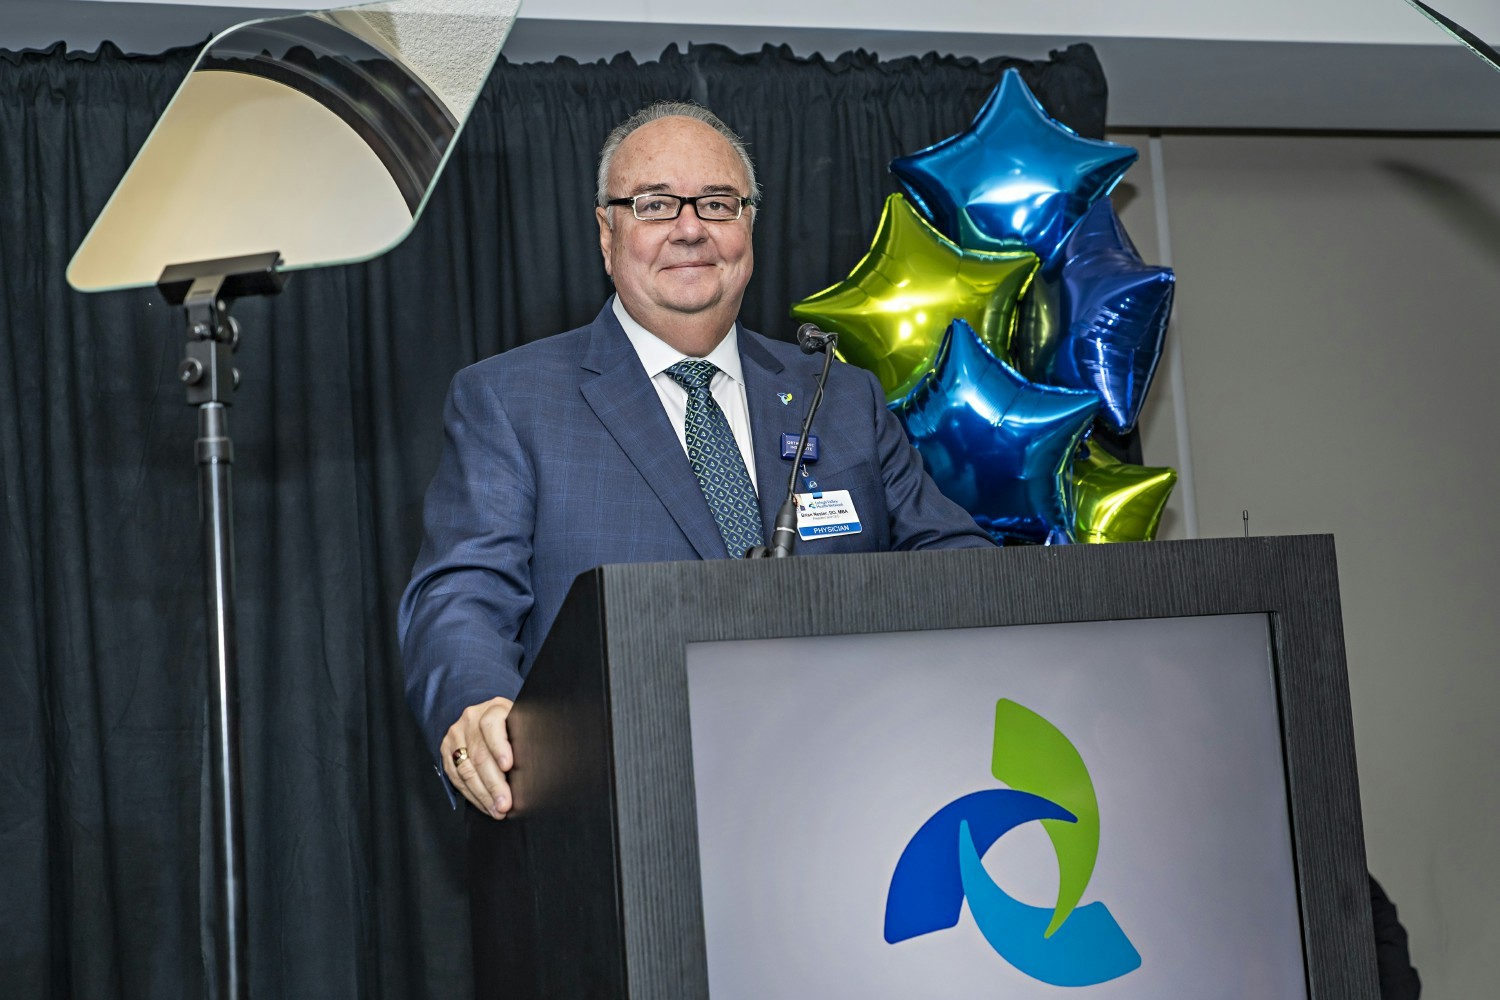 Brian A. Nester, DO, MBA, has served as President and Chief Executive Officer of LVHN since 2014.